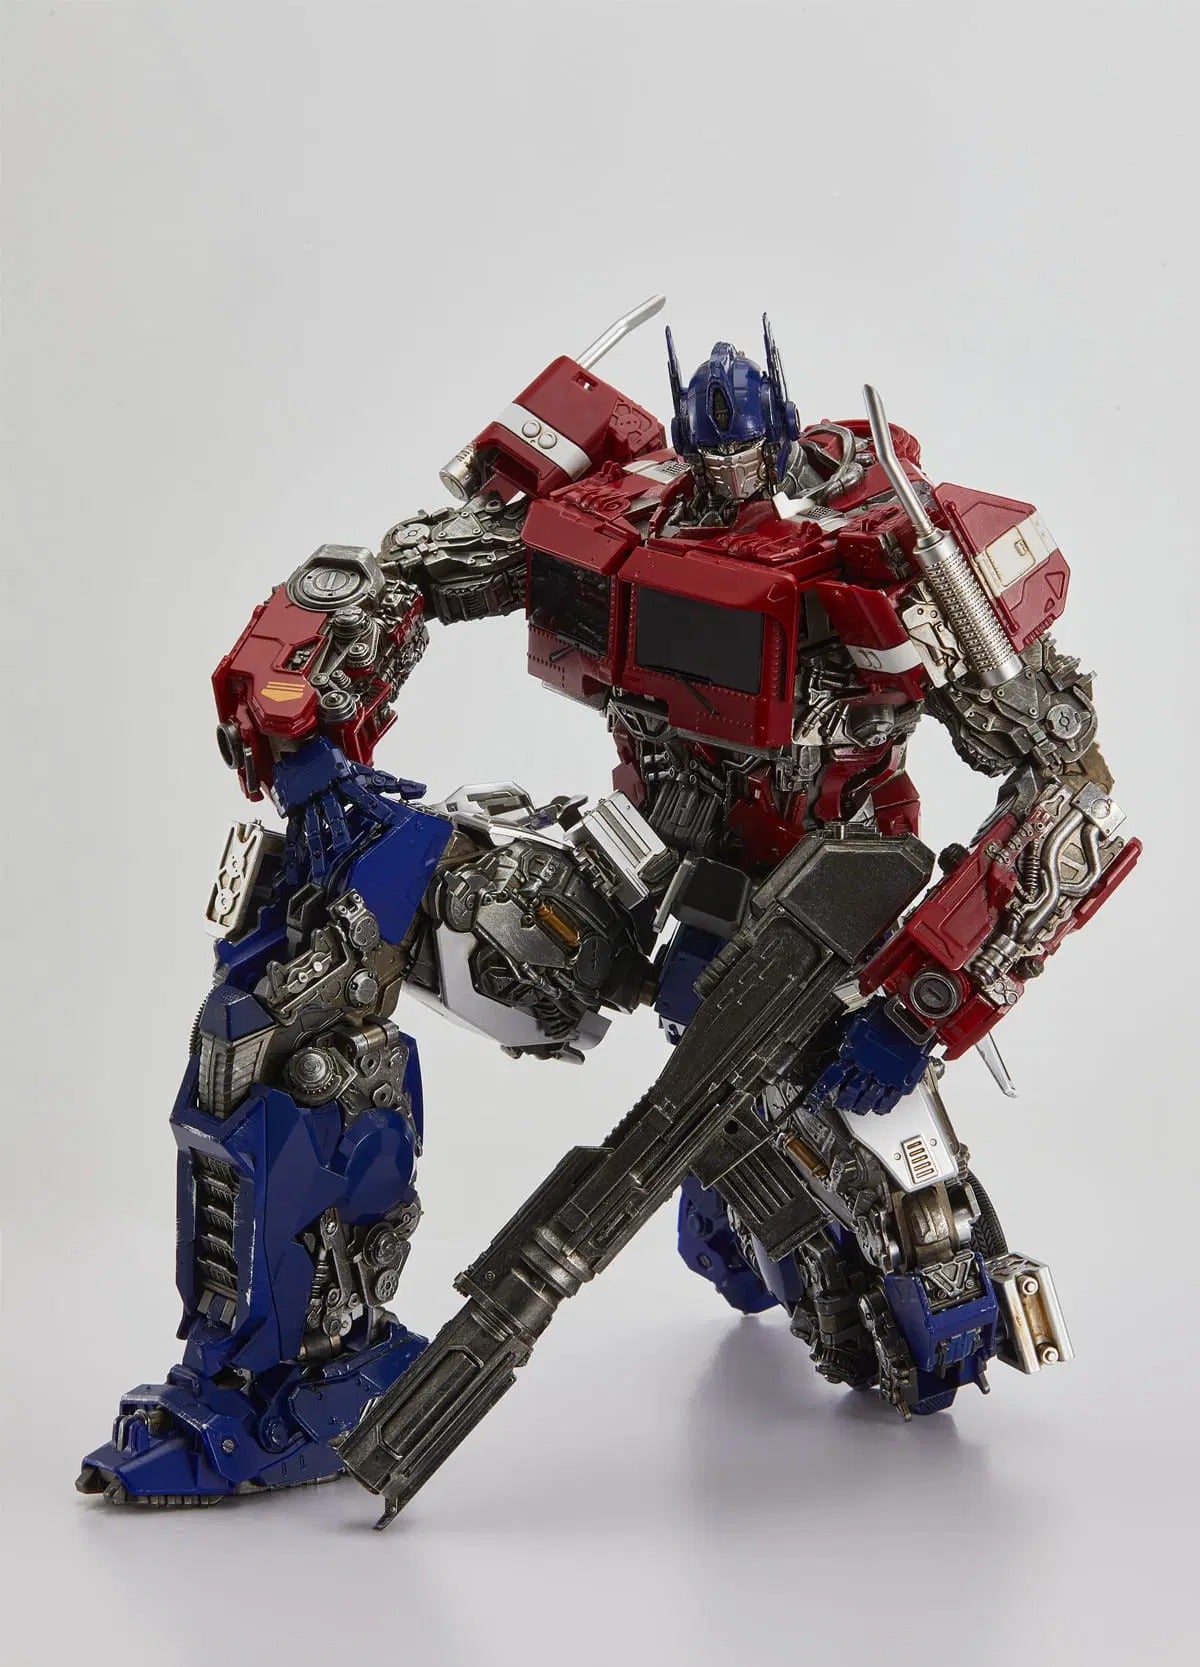 This figure is about 30.00 cm tall and the main body weighs about 1 kilo, fully articulated and featuring a die-cast skeleton, rubber tires, weathering finish, LED eyes, magnetic parts (not specified which ones) and it will include a display base. As we can see from the images, robot mode look very movie-accurate and compact as well as the alt mode.